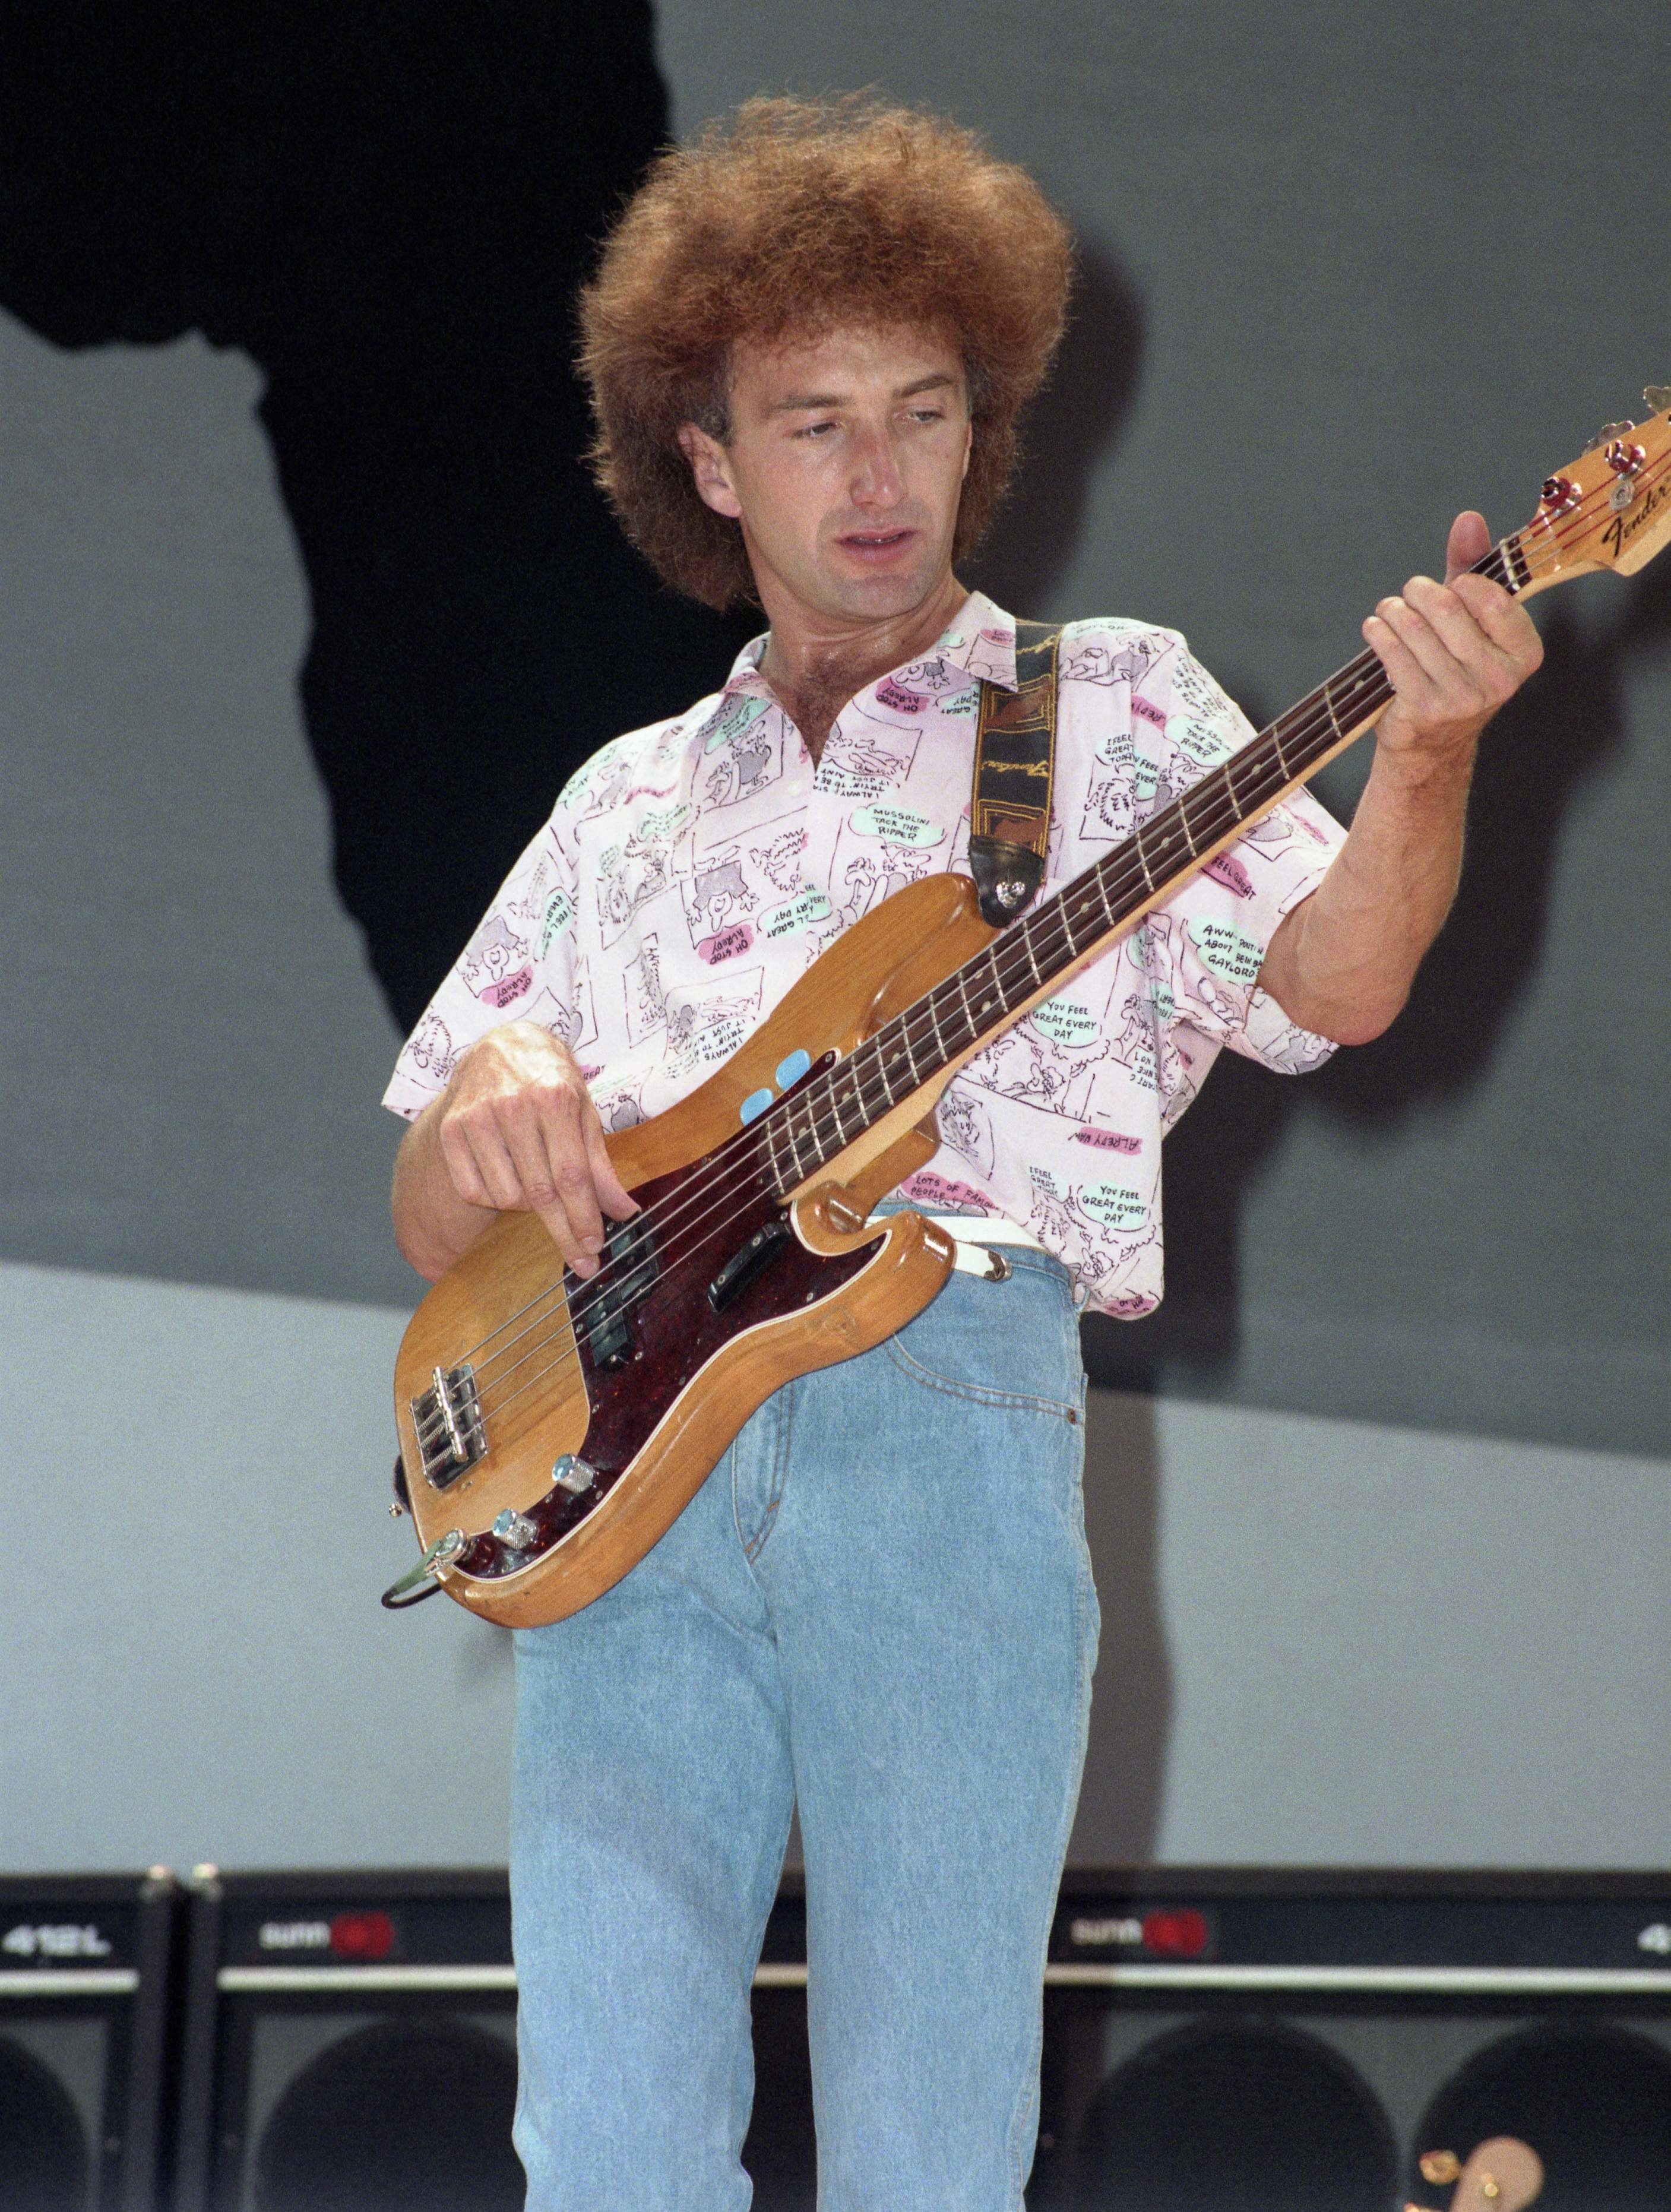 John playing bass on stage